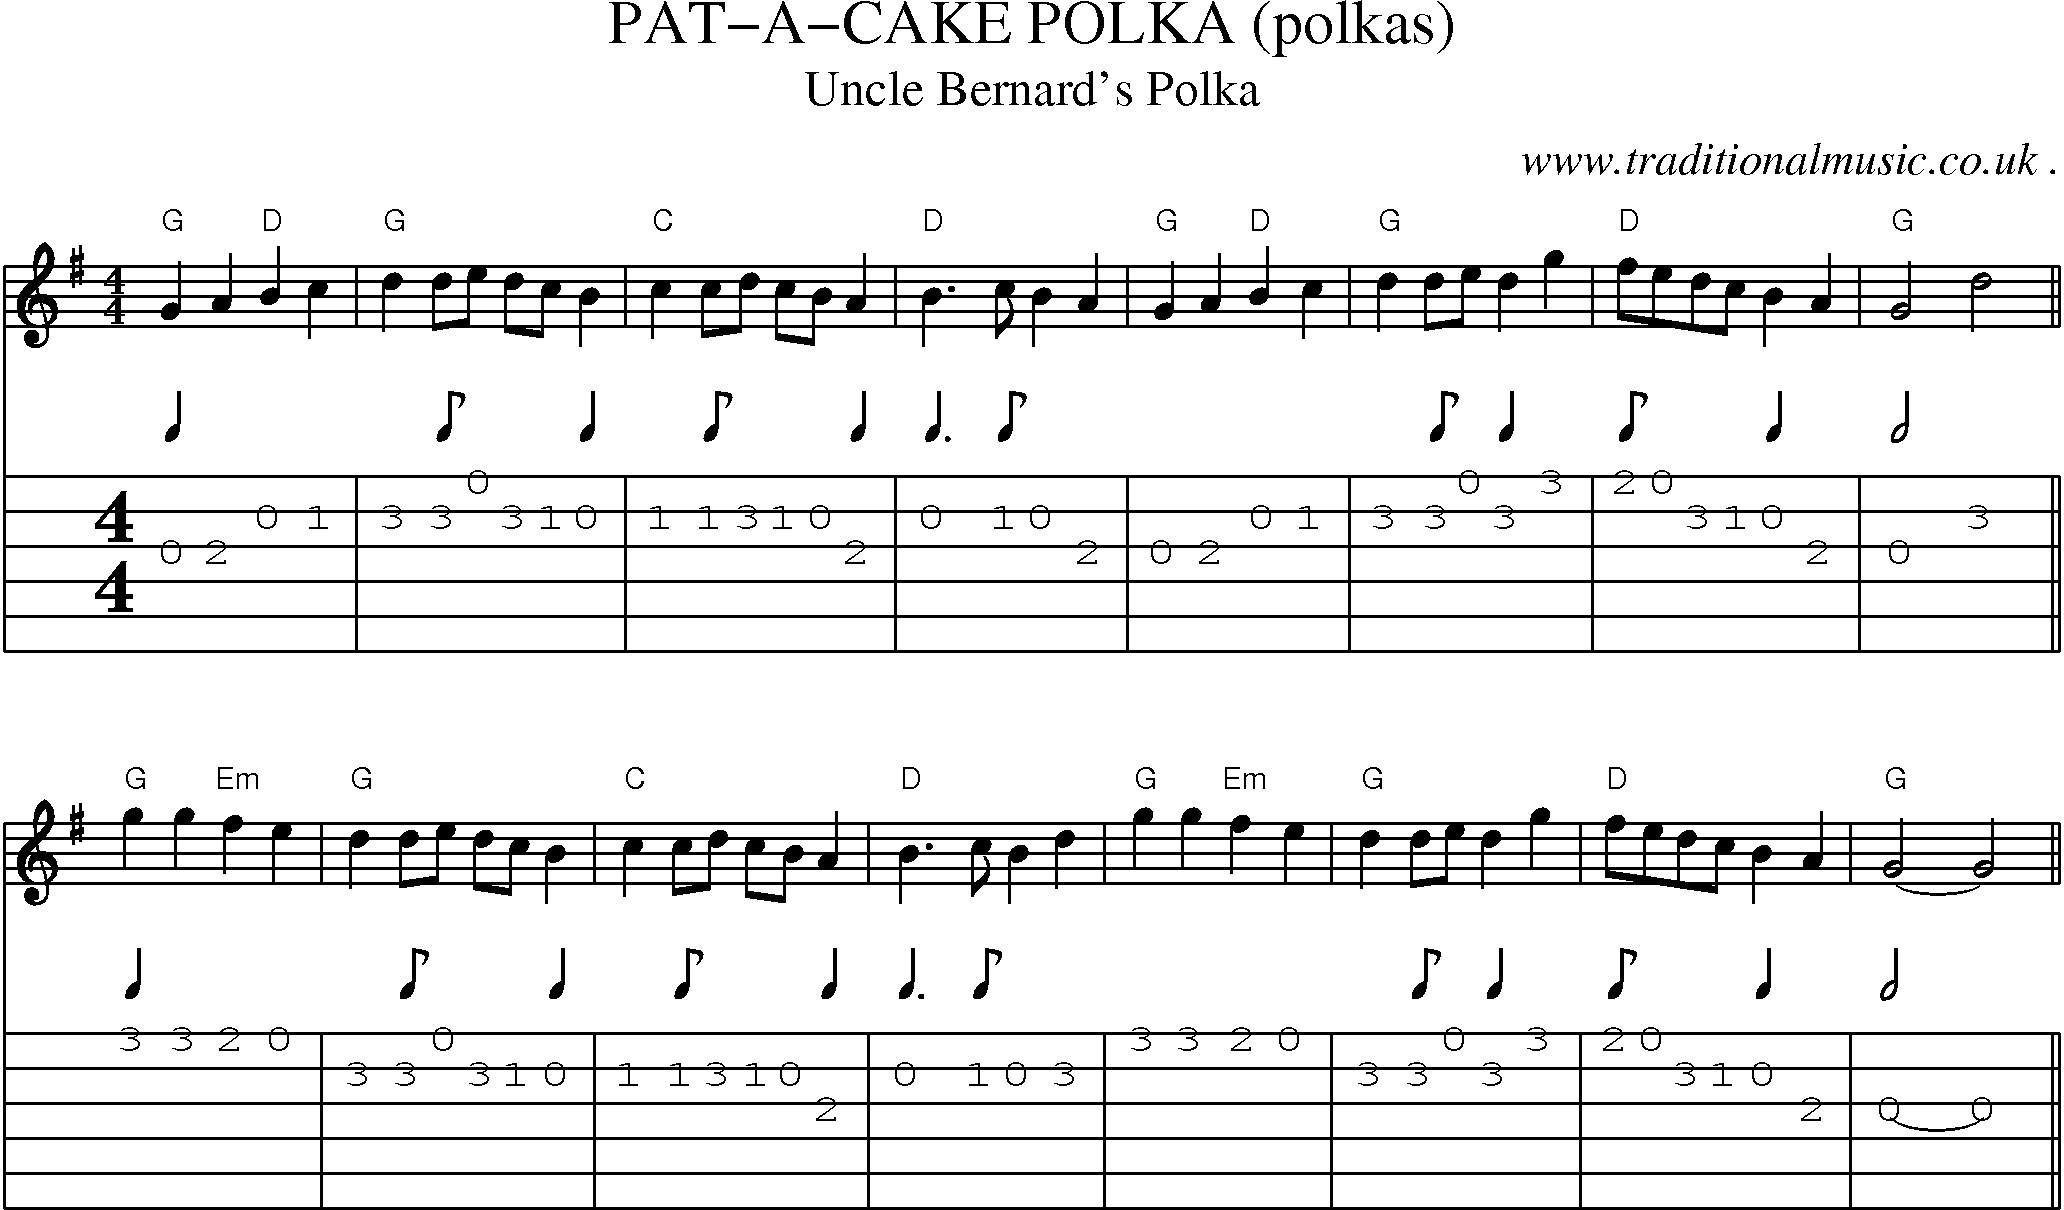 Music Score and Guitar Tabs for Pat-a-cake Polka (polkas)